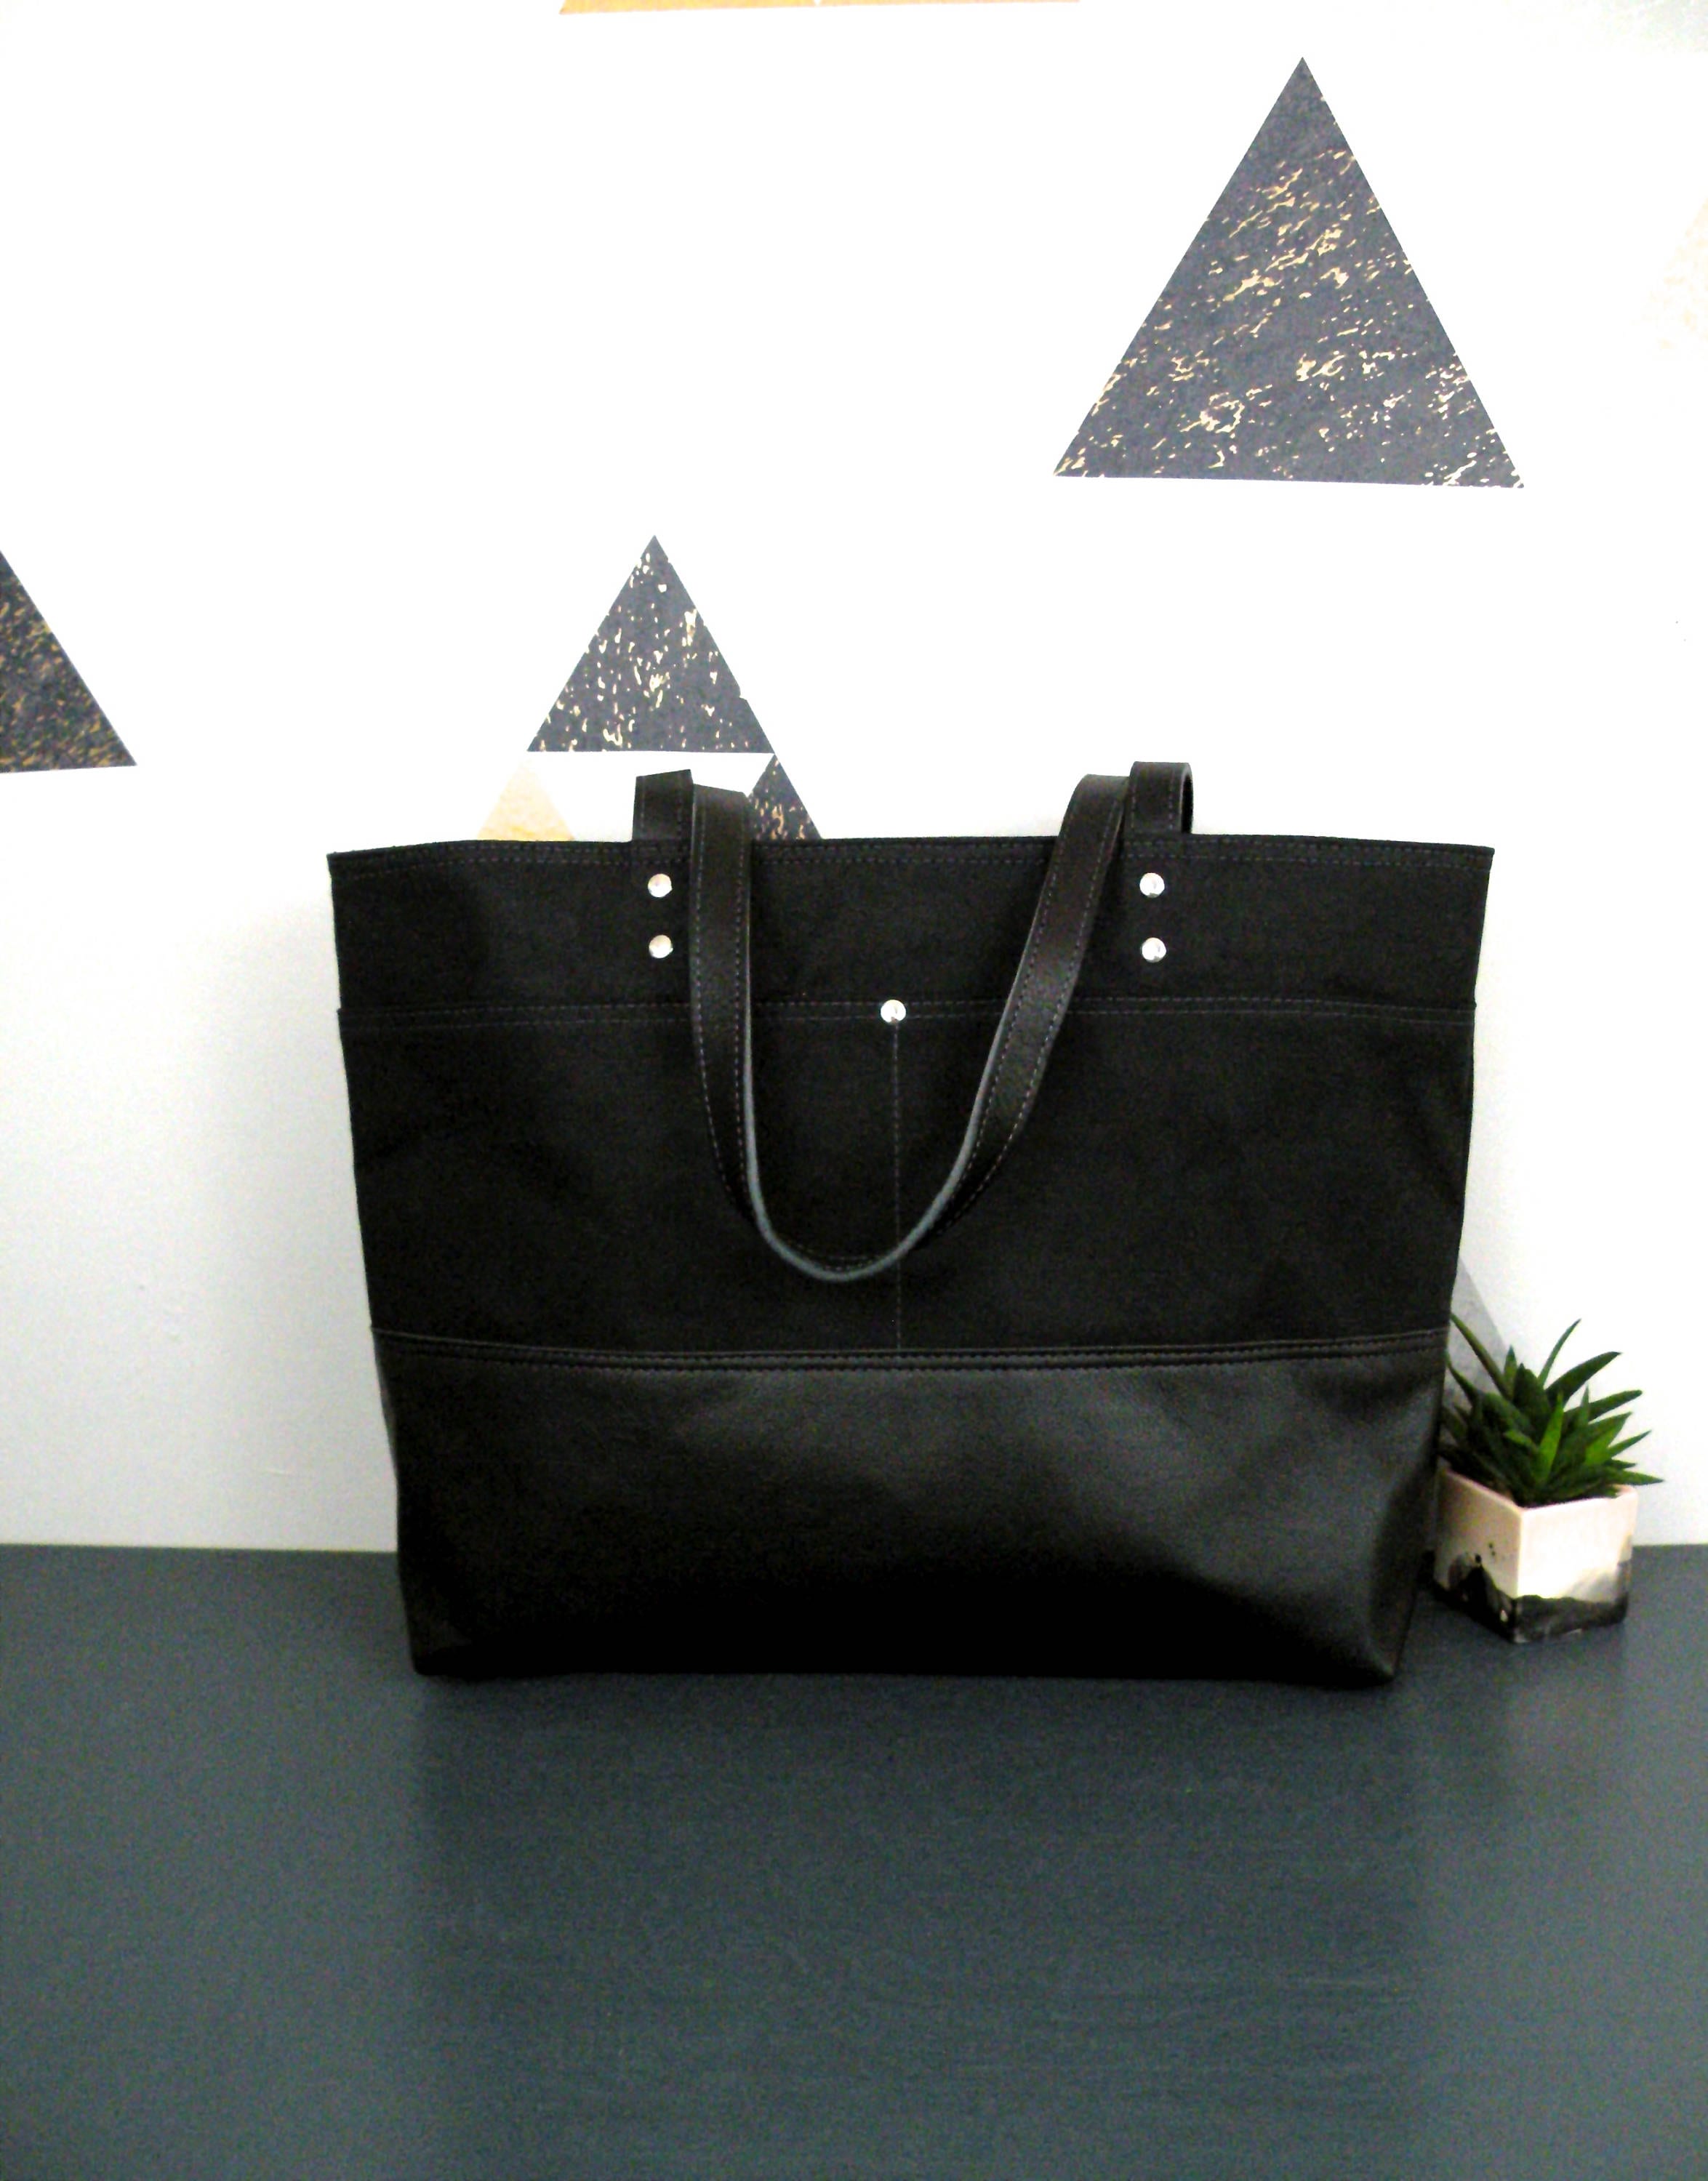 All black tote Waxed Canvas Tote Leather Bottom Bag Sturdy